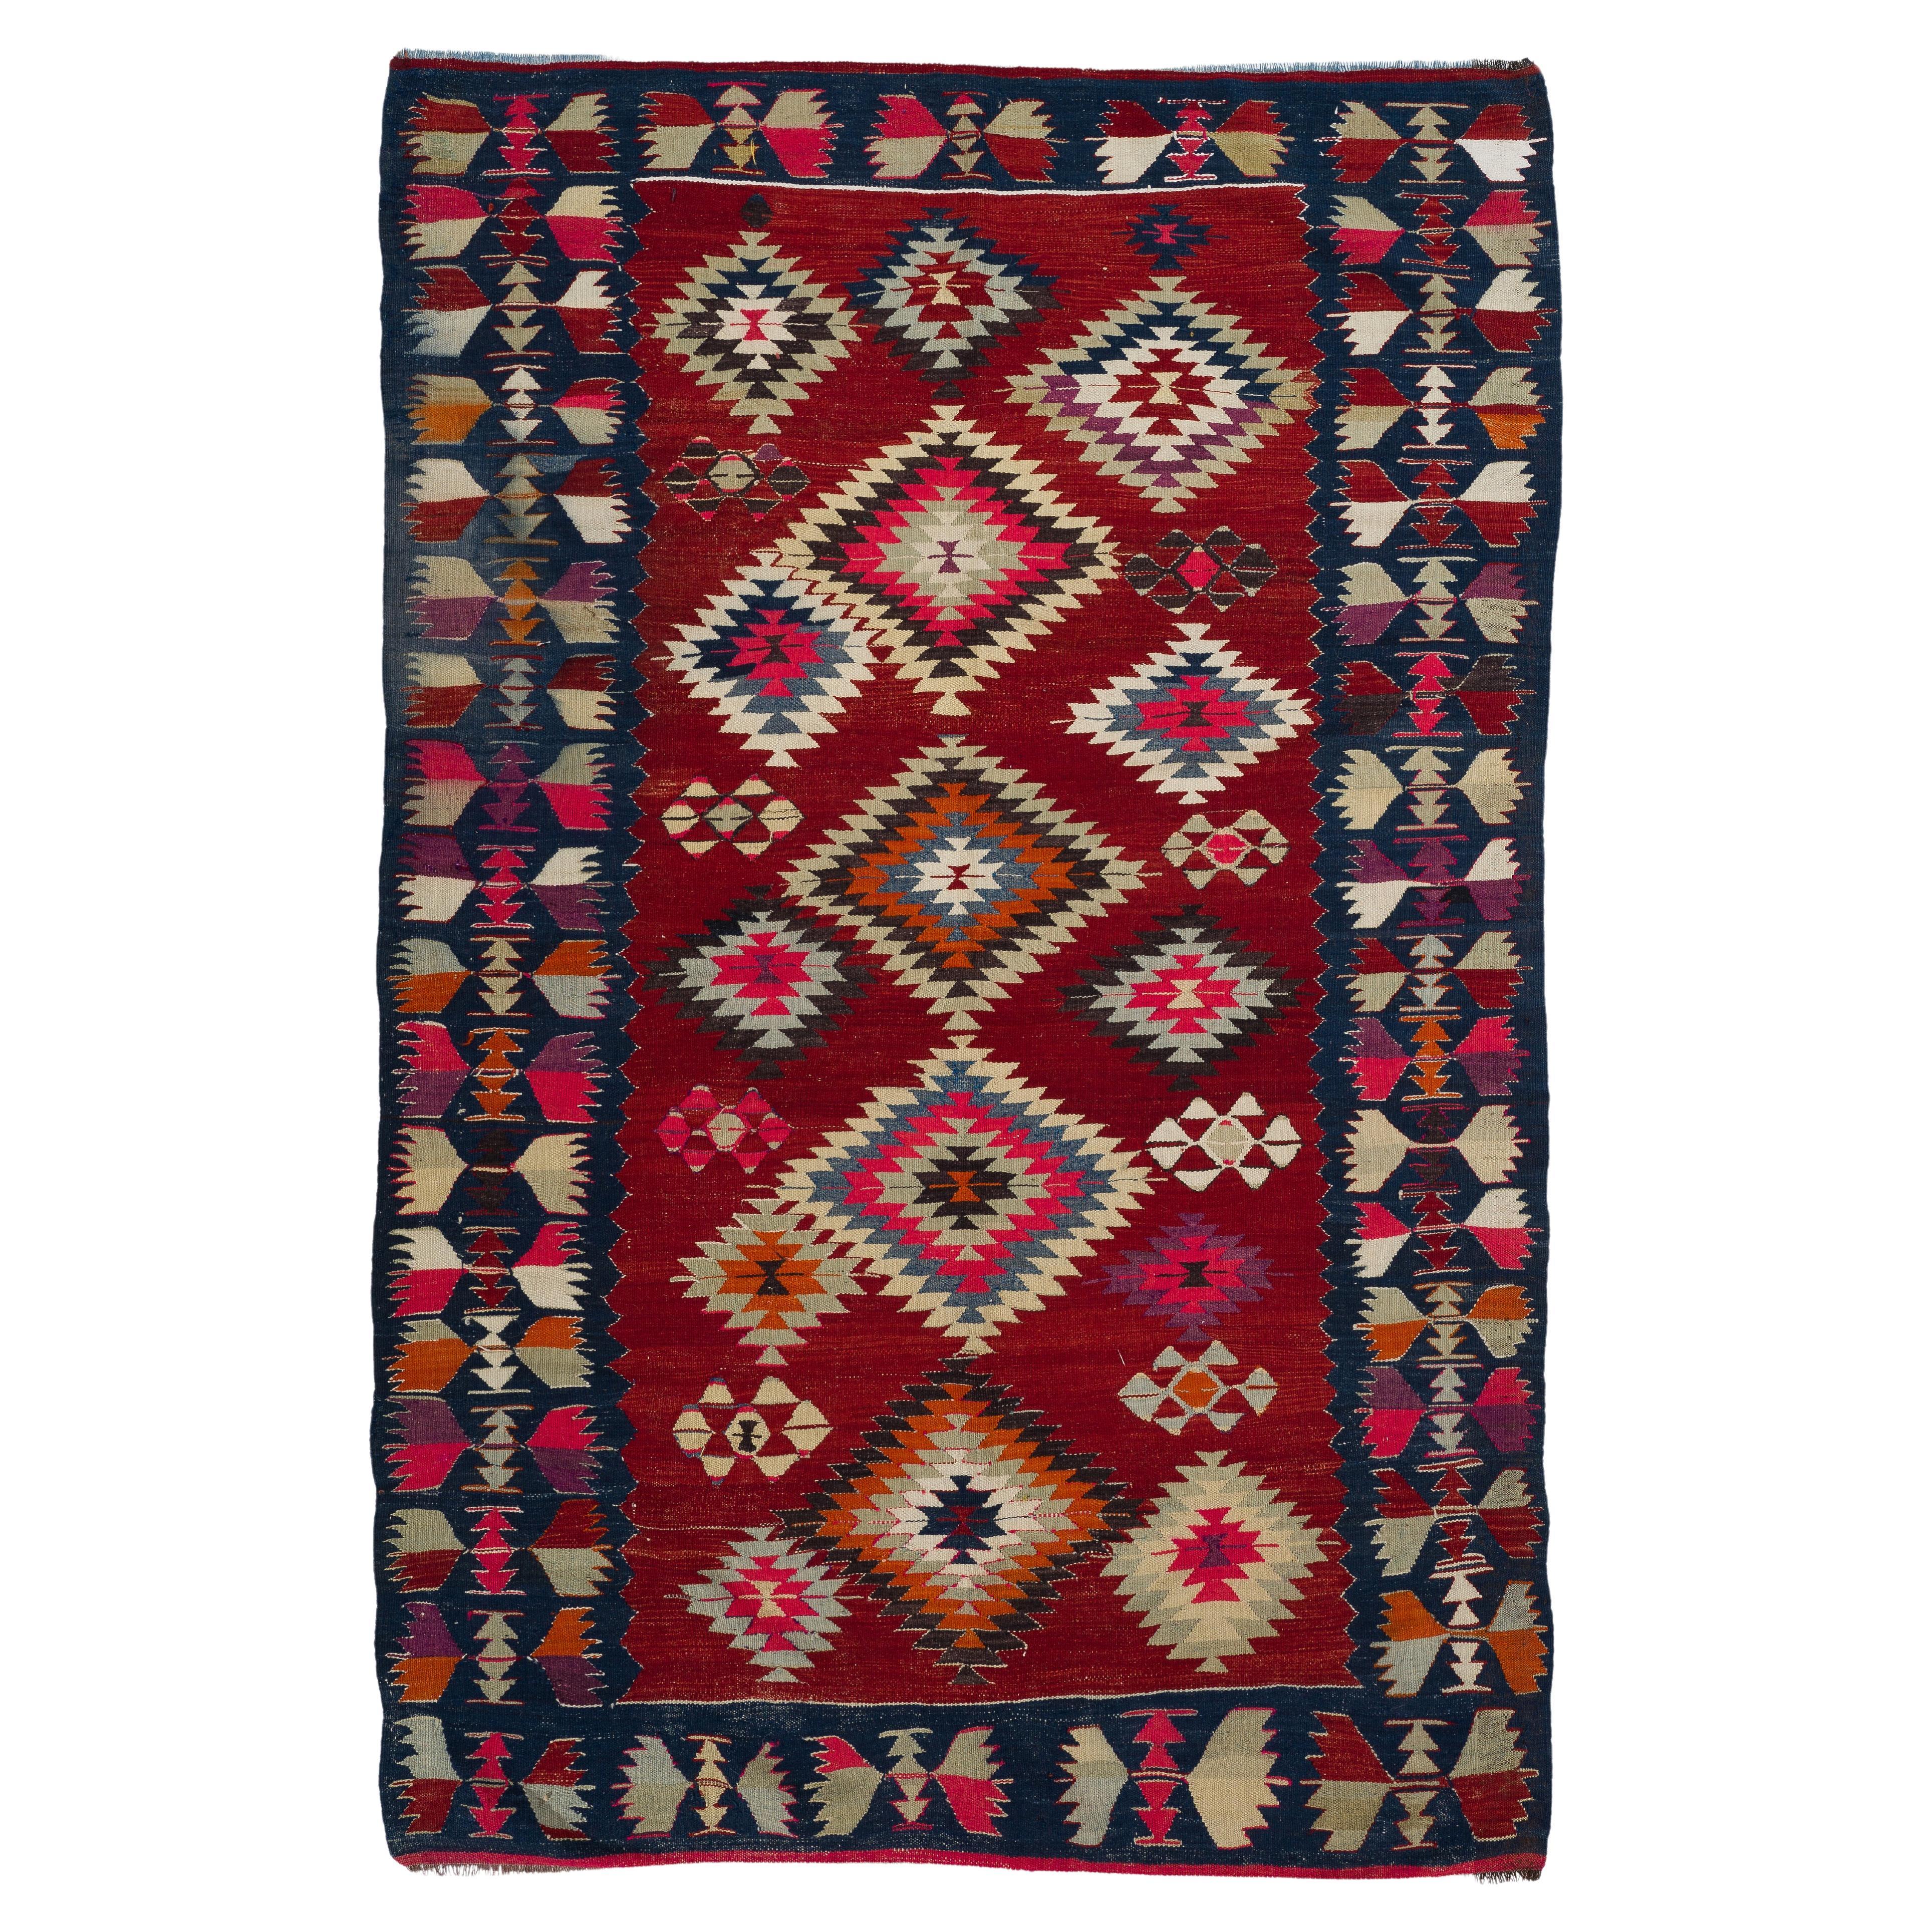 5.4x8.5 ft Hand Woven Turkish Kilim Rug with Geometric Design in Red and Indigo For Sale